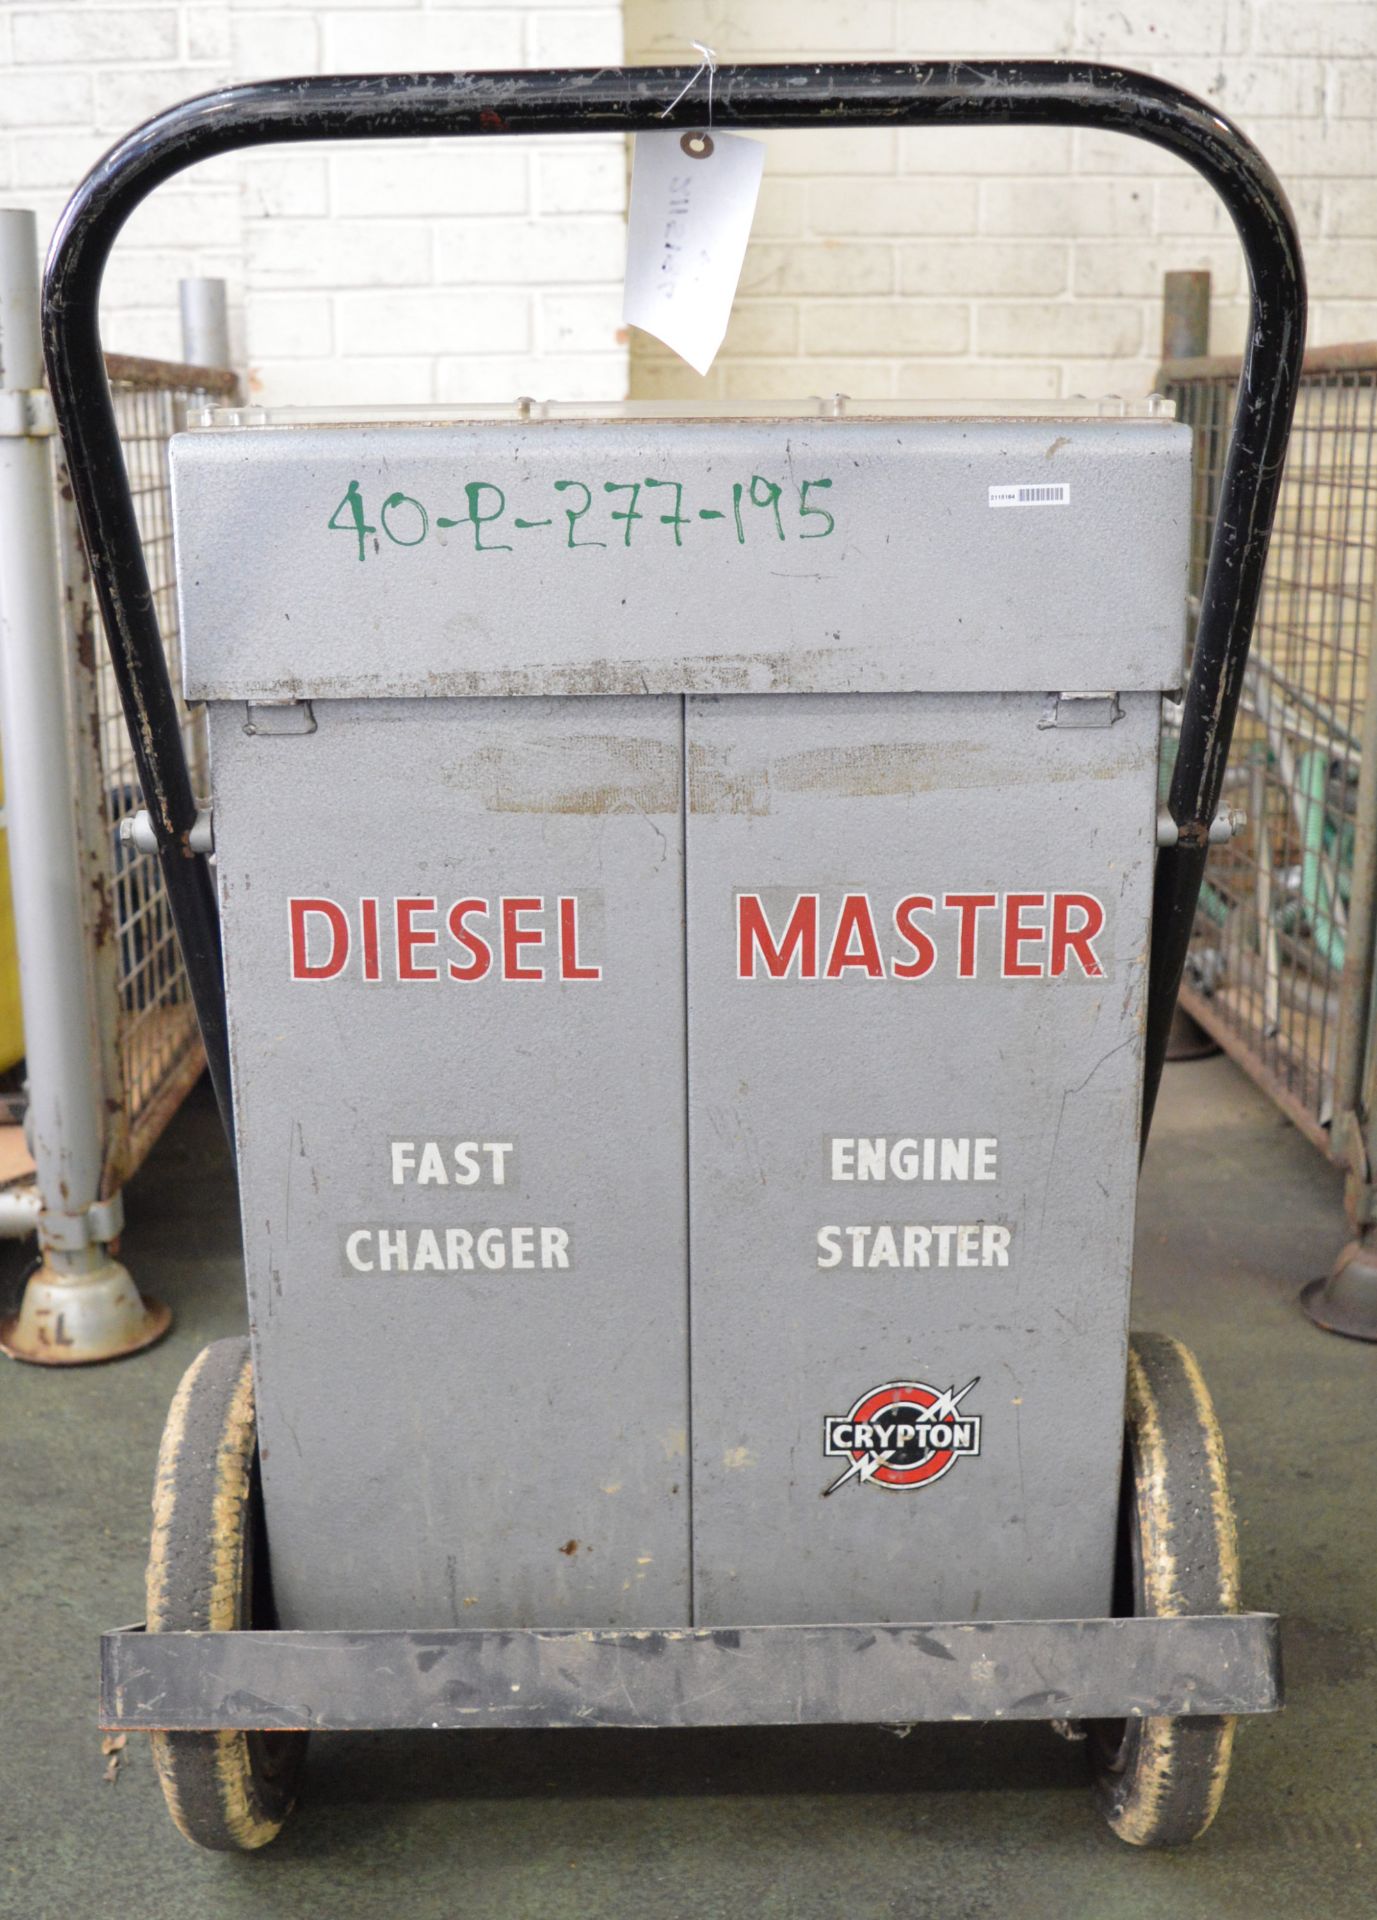 Charger/Engine Starter Unit, Crypton Diesel Master. - Image 2 of 3